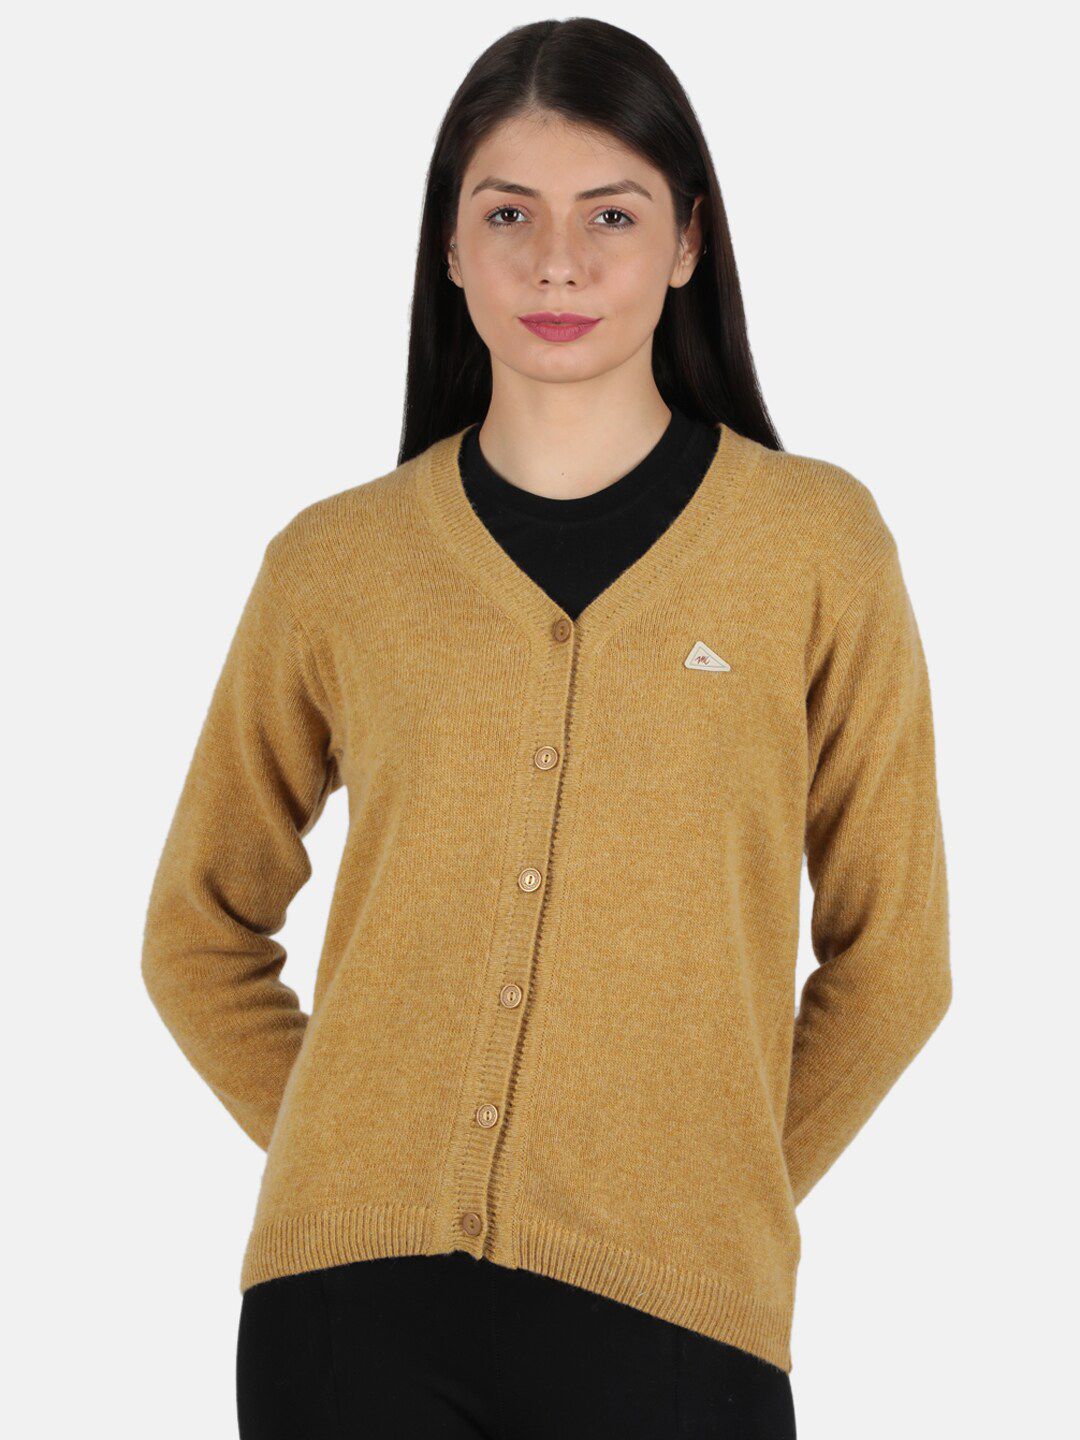 Monte Carlo Women's Lambs Wool Mustard Solid V Neck Cardigan Price in India